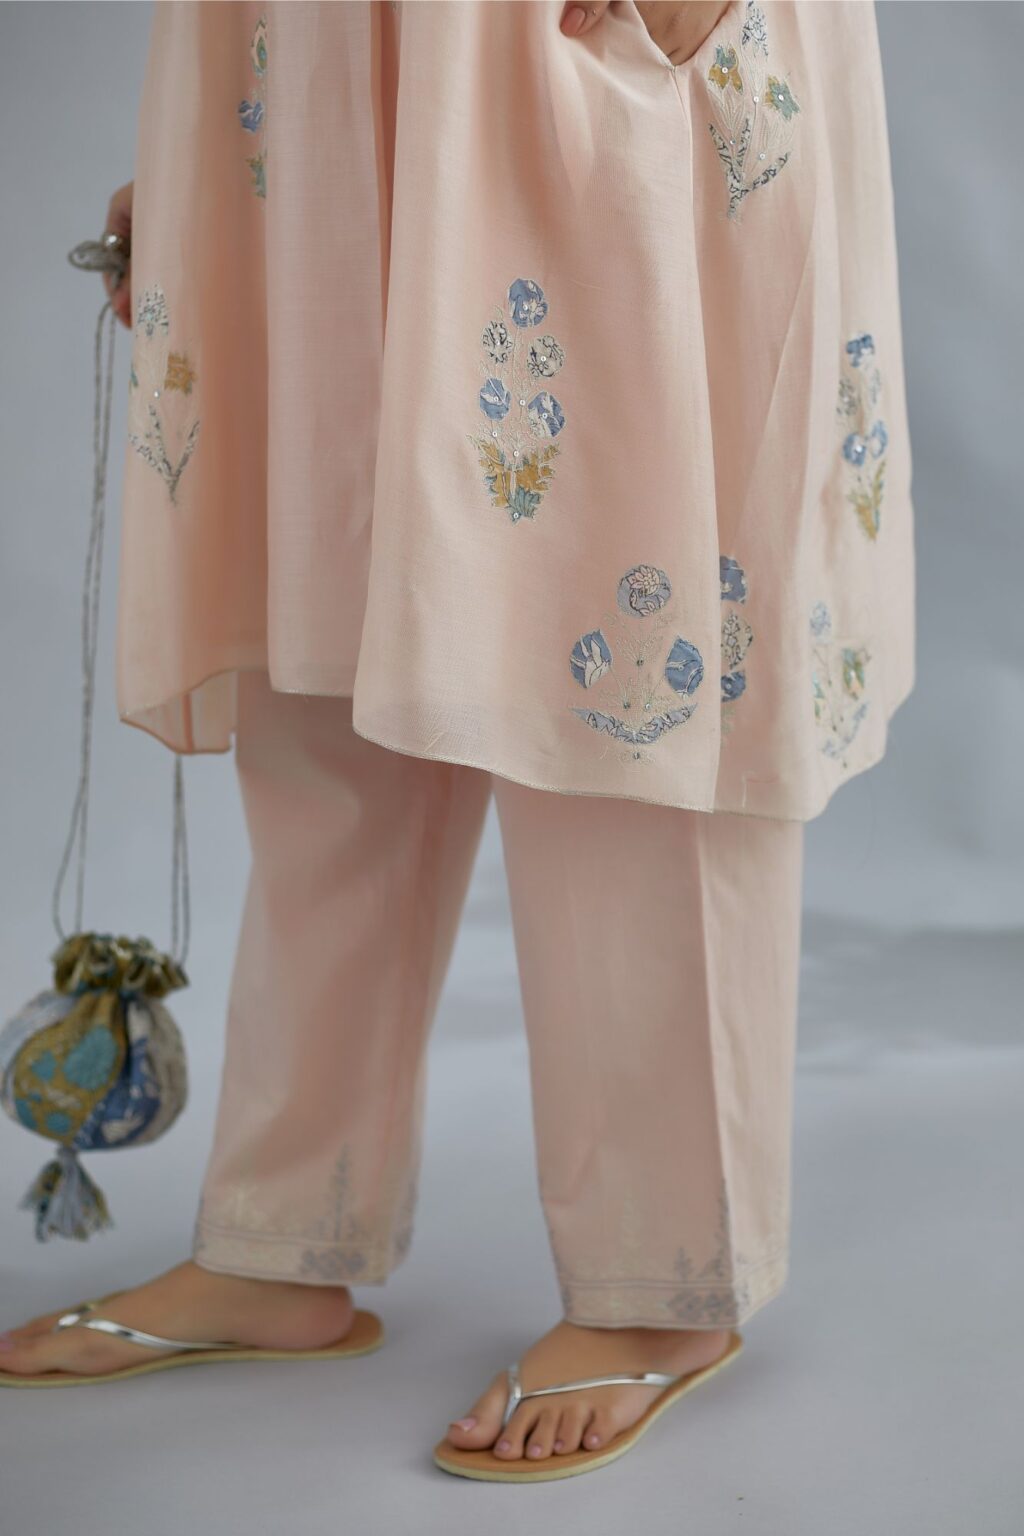 Seashell pink short kurta set with printed floral applique work, highlighted with zari embroidery and sequins.